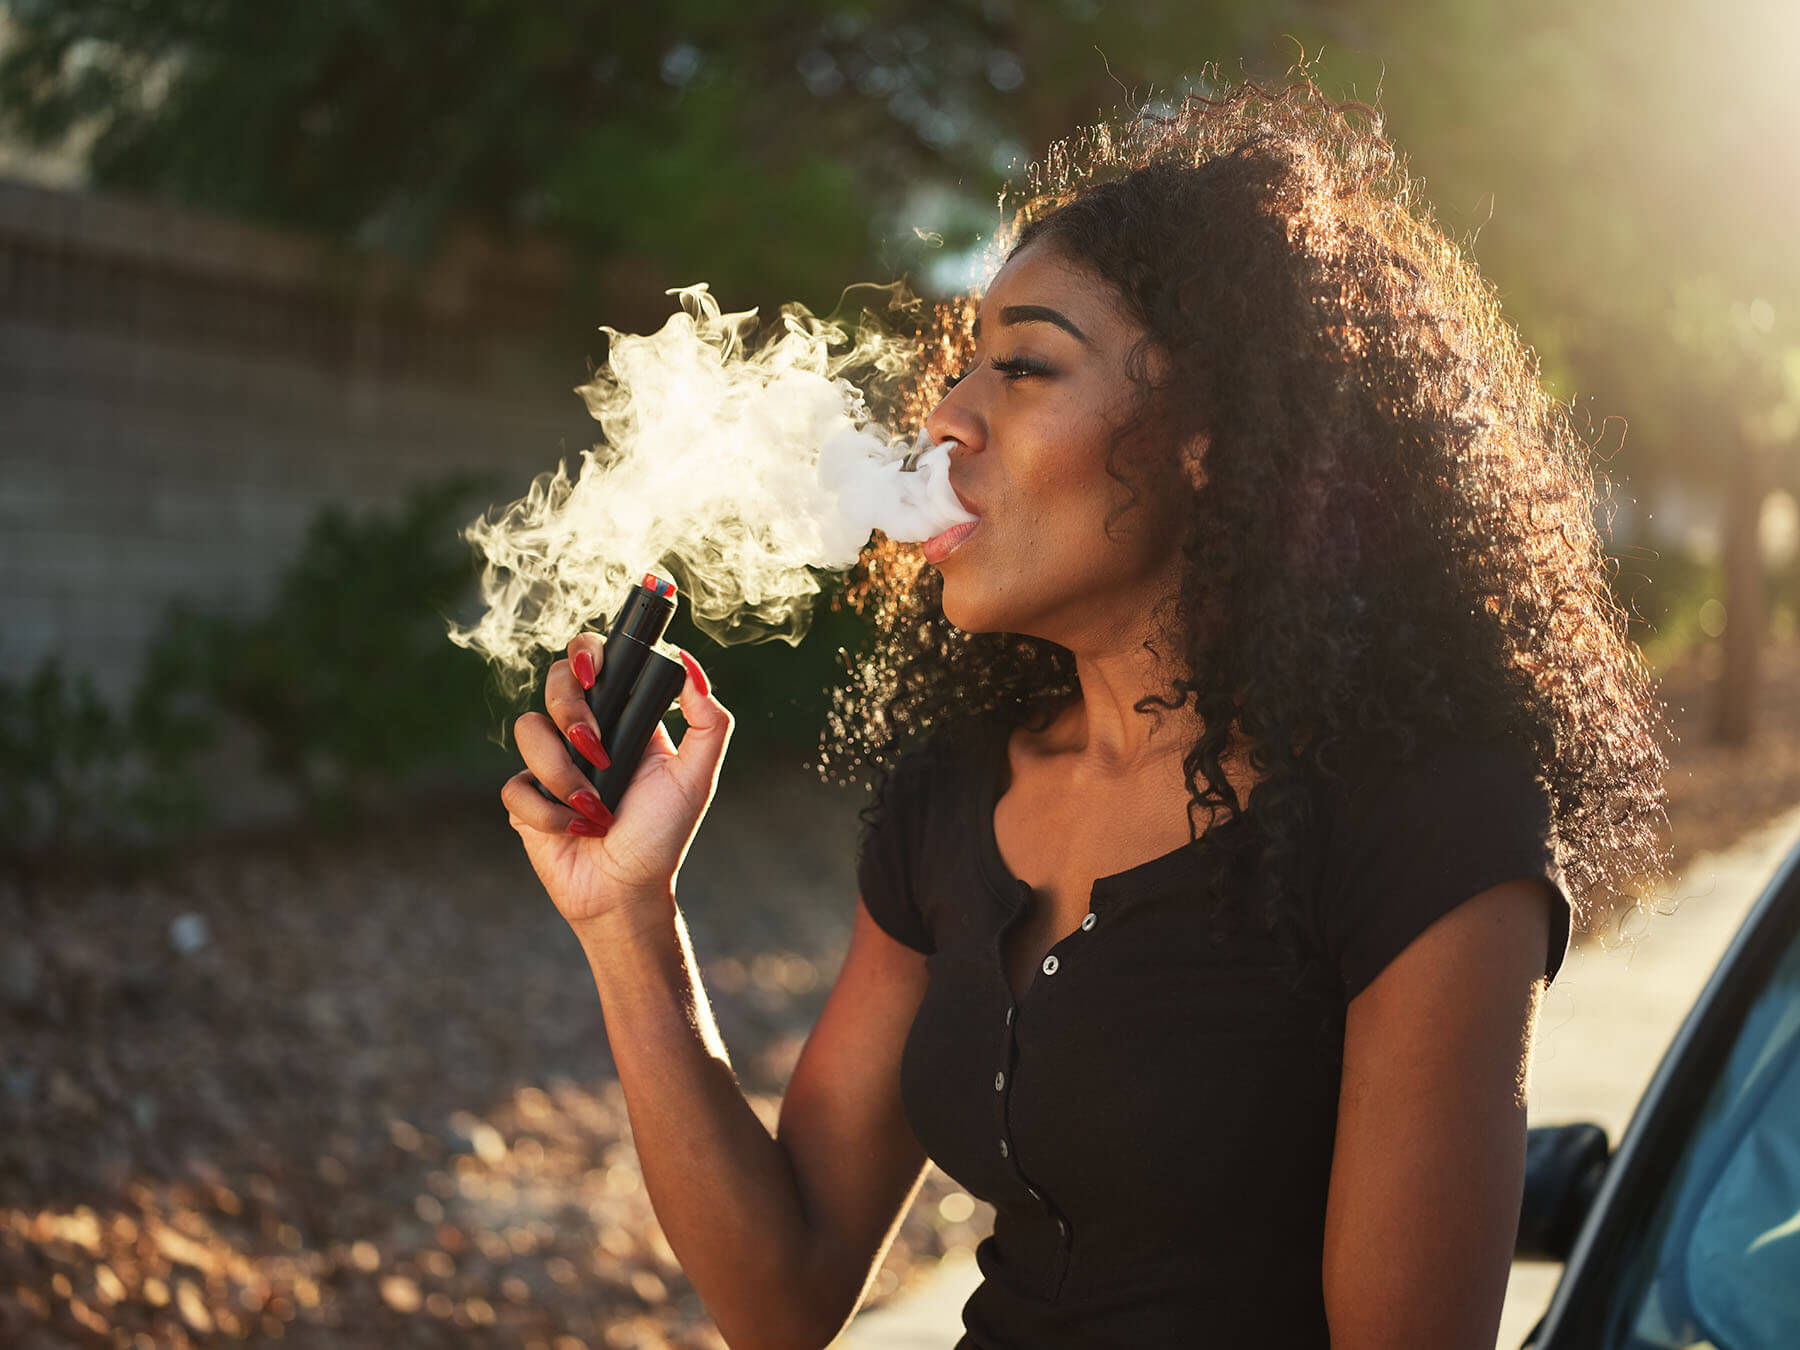 vaping-changes-oral-microbiome-increasing-risk-for-infection-odha